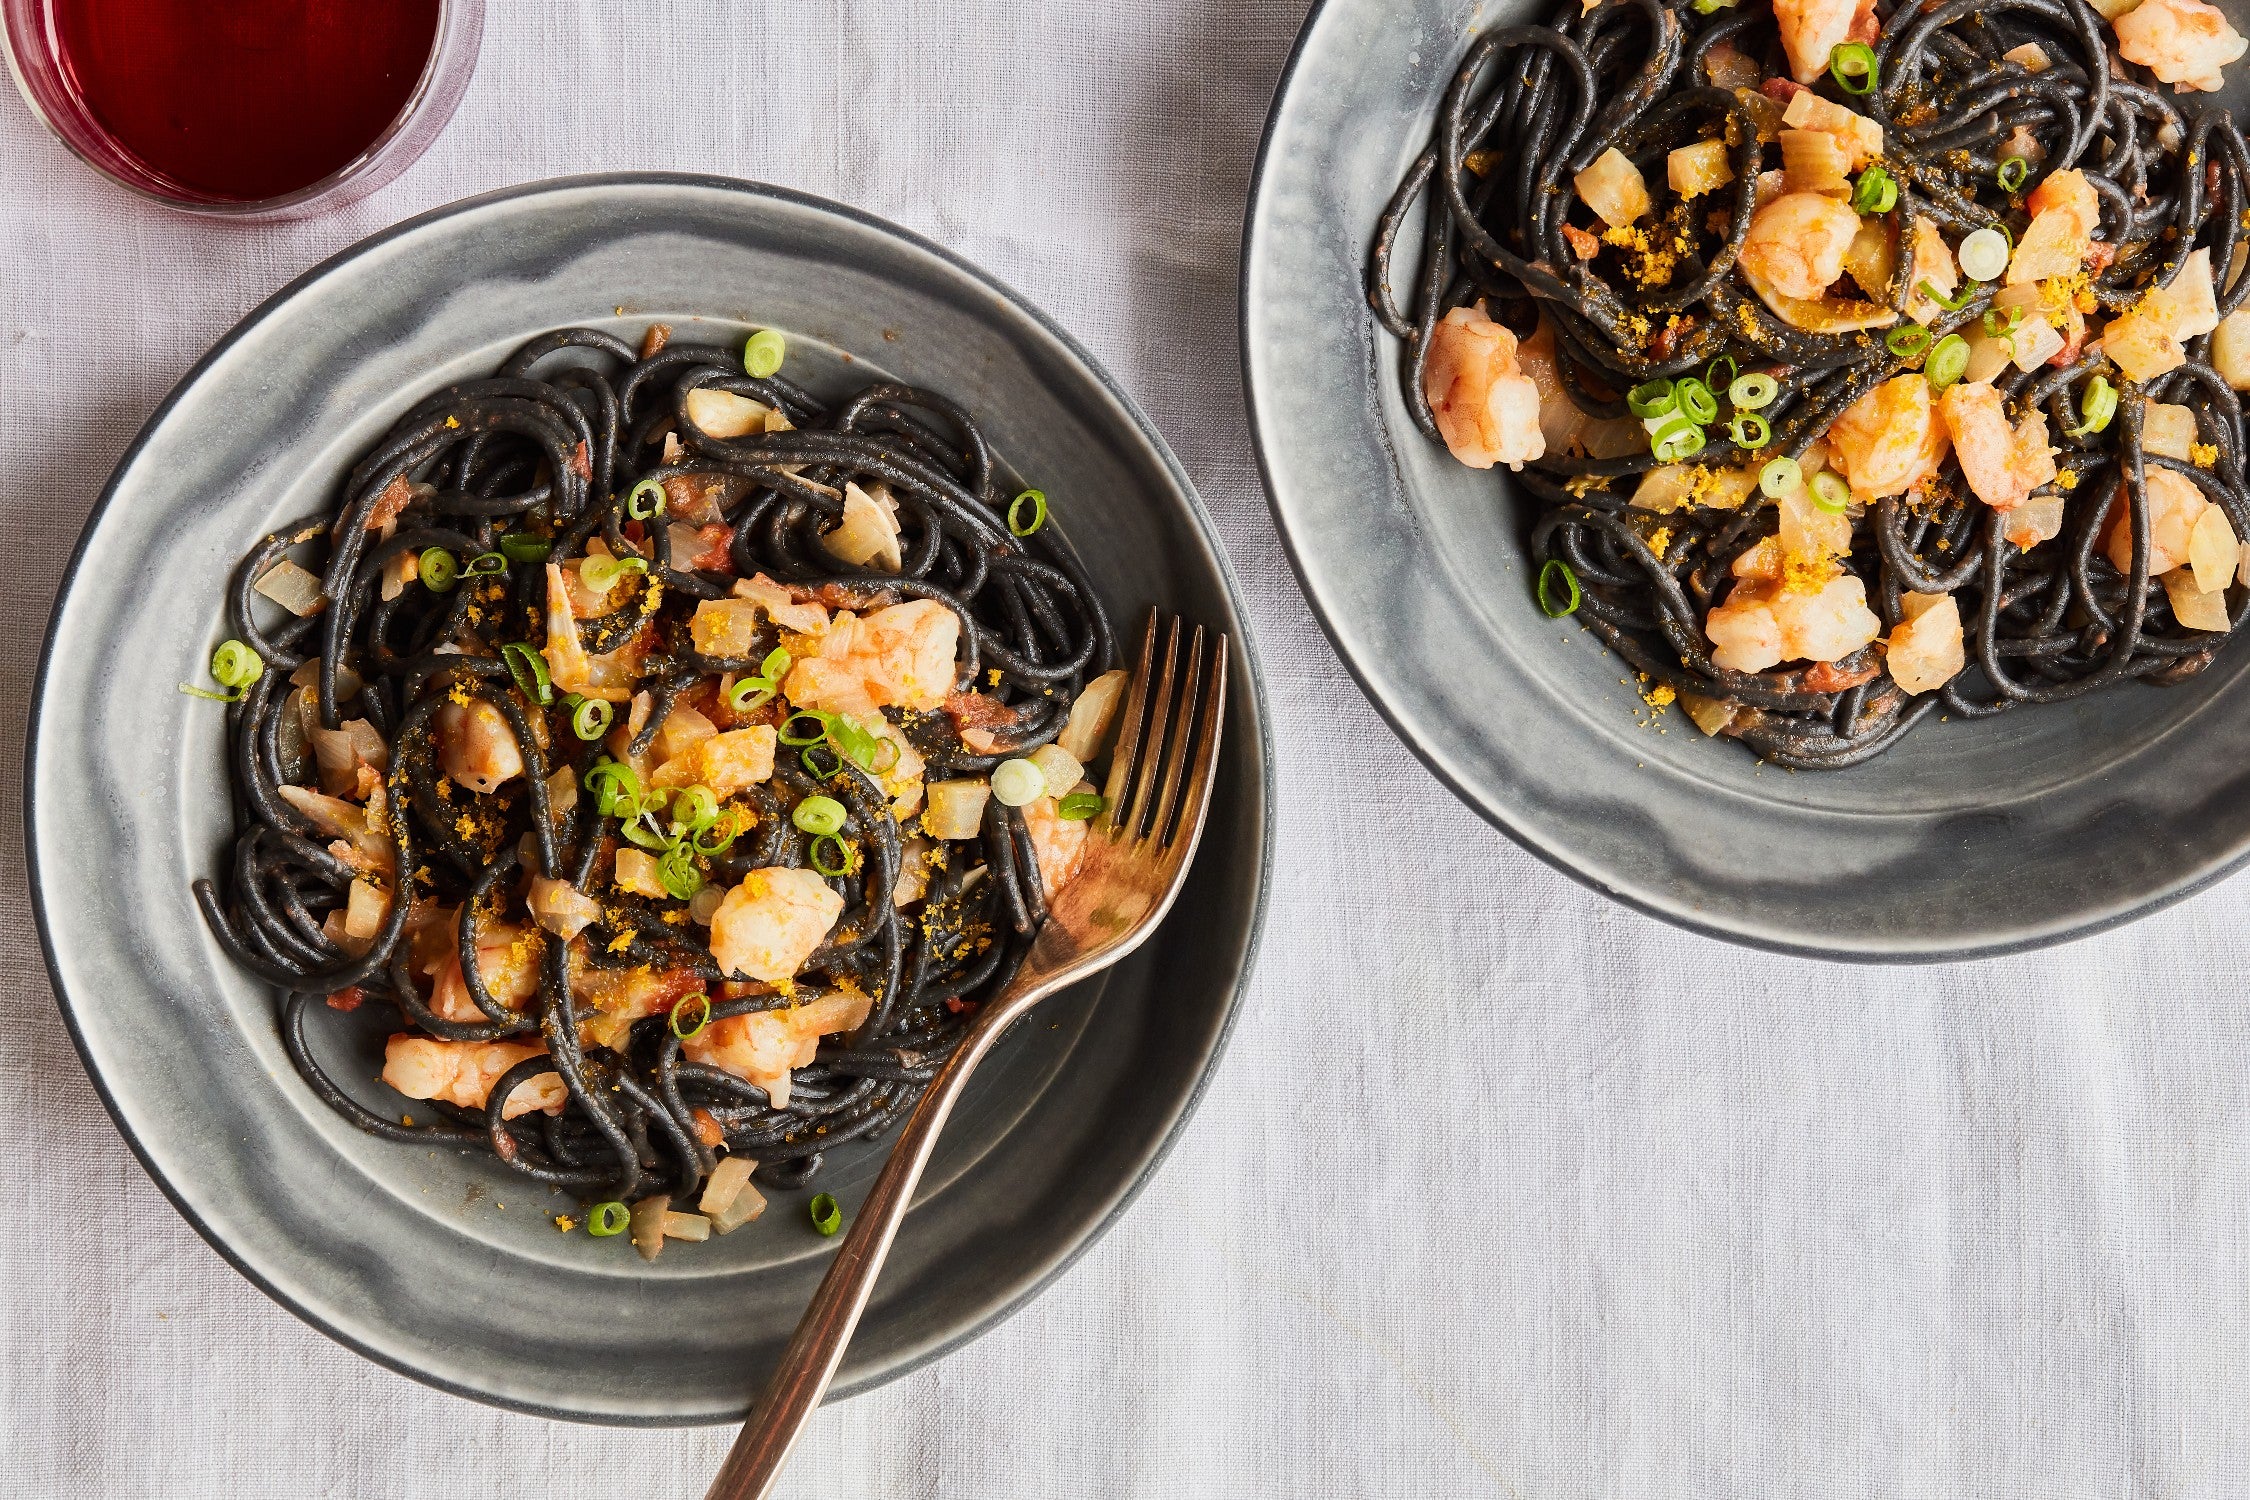 Squid Ink Pasta With Shrimp, Fennel, Tomatoes, and Bottarga Butter